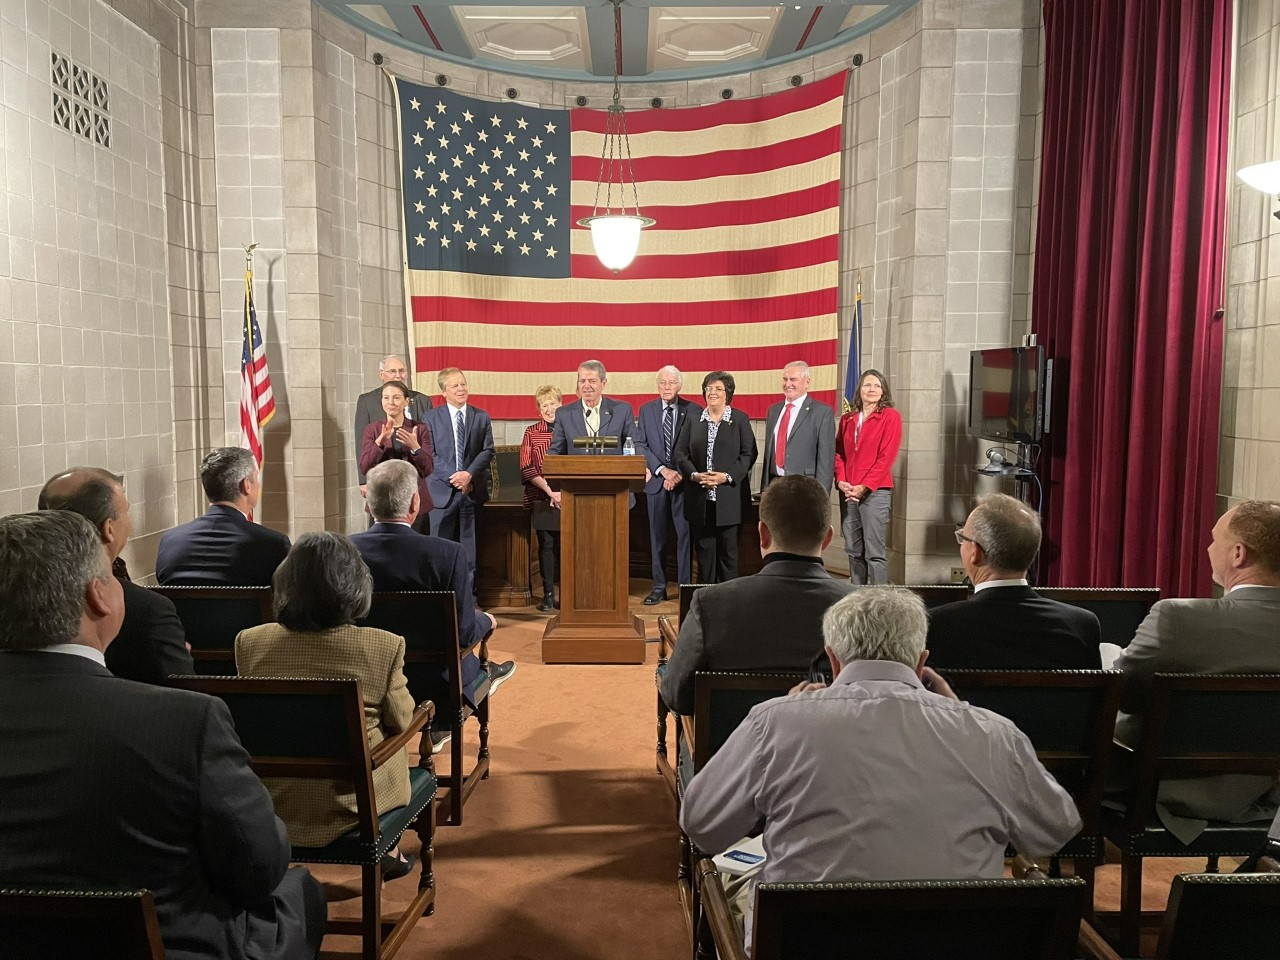 Governor Jim Pillen, accompanied by several state senators including members of the Revenue Committee